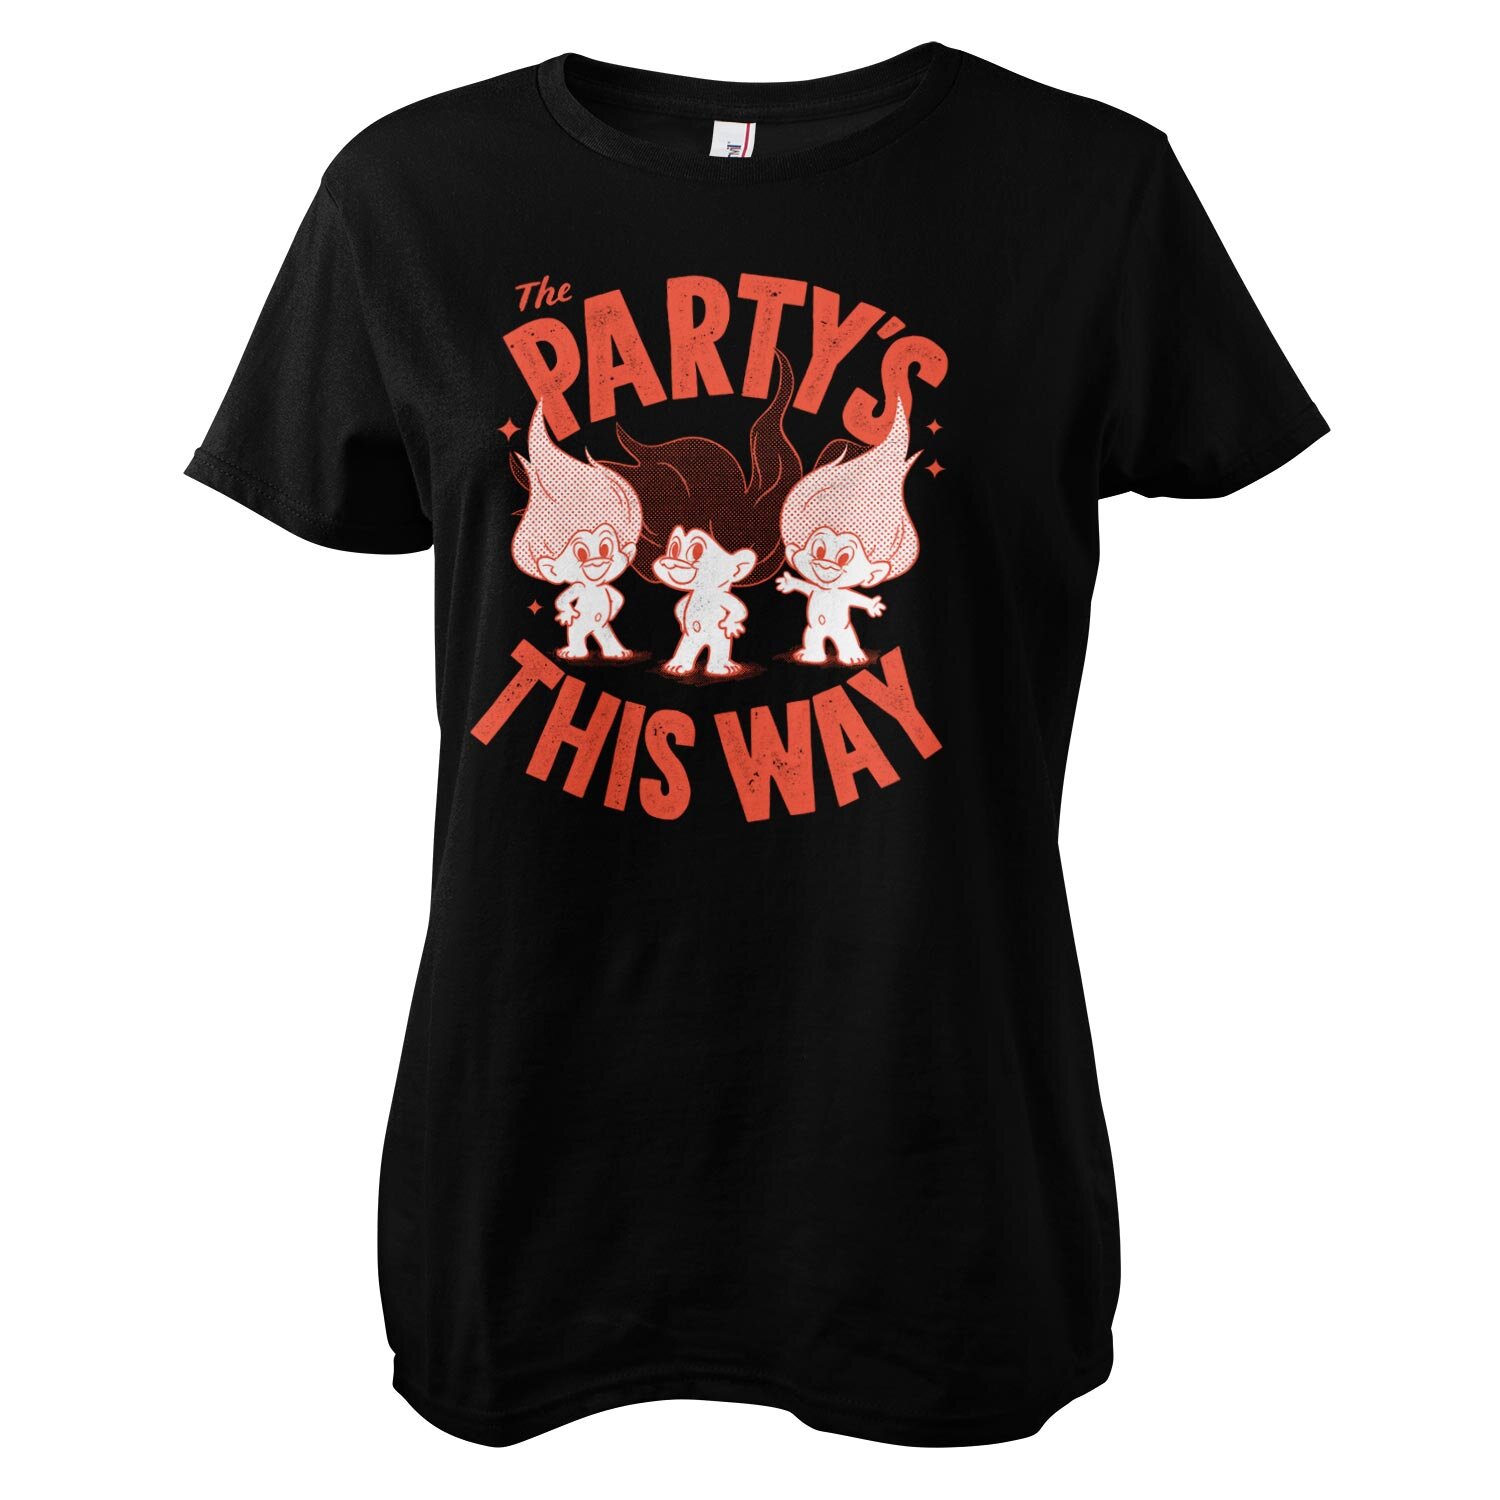 The Party's This Way Girly Tee